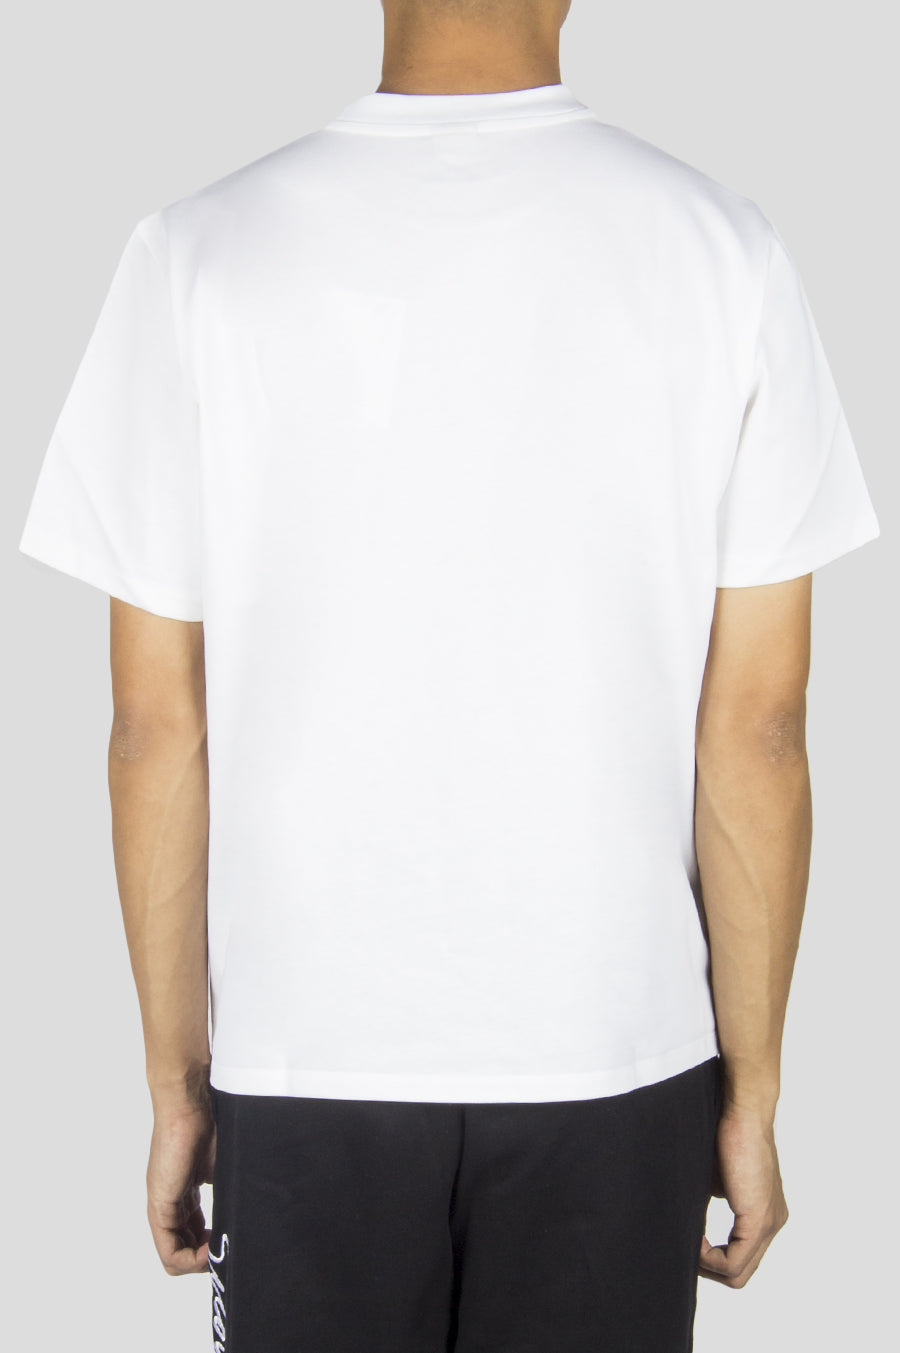 SECOND LAYER STRUCTURED JERSEY CROPPED T-SHIRT WHITE – BLENDS